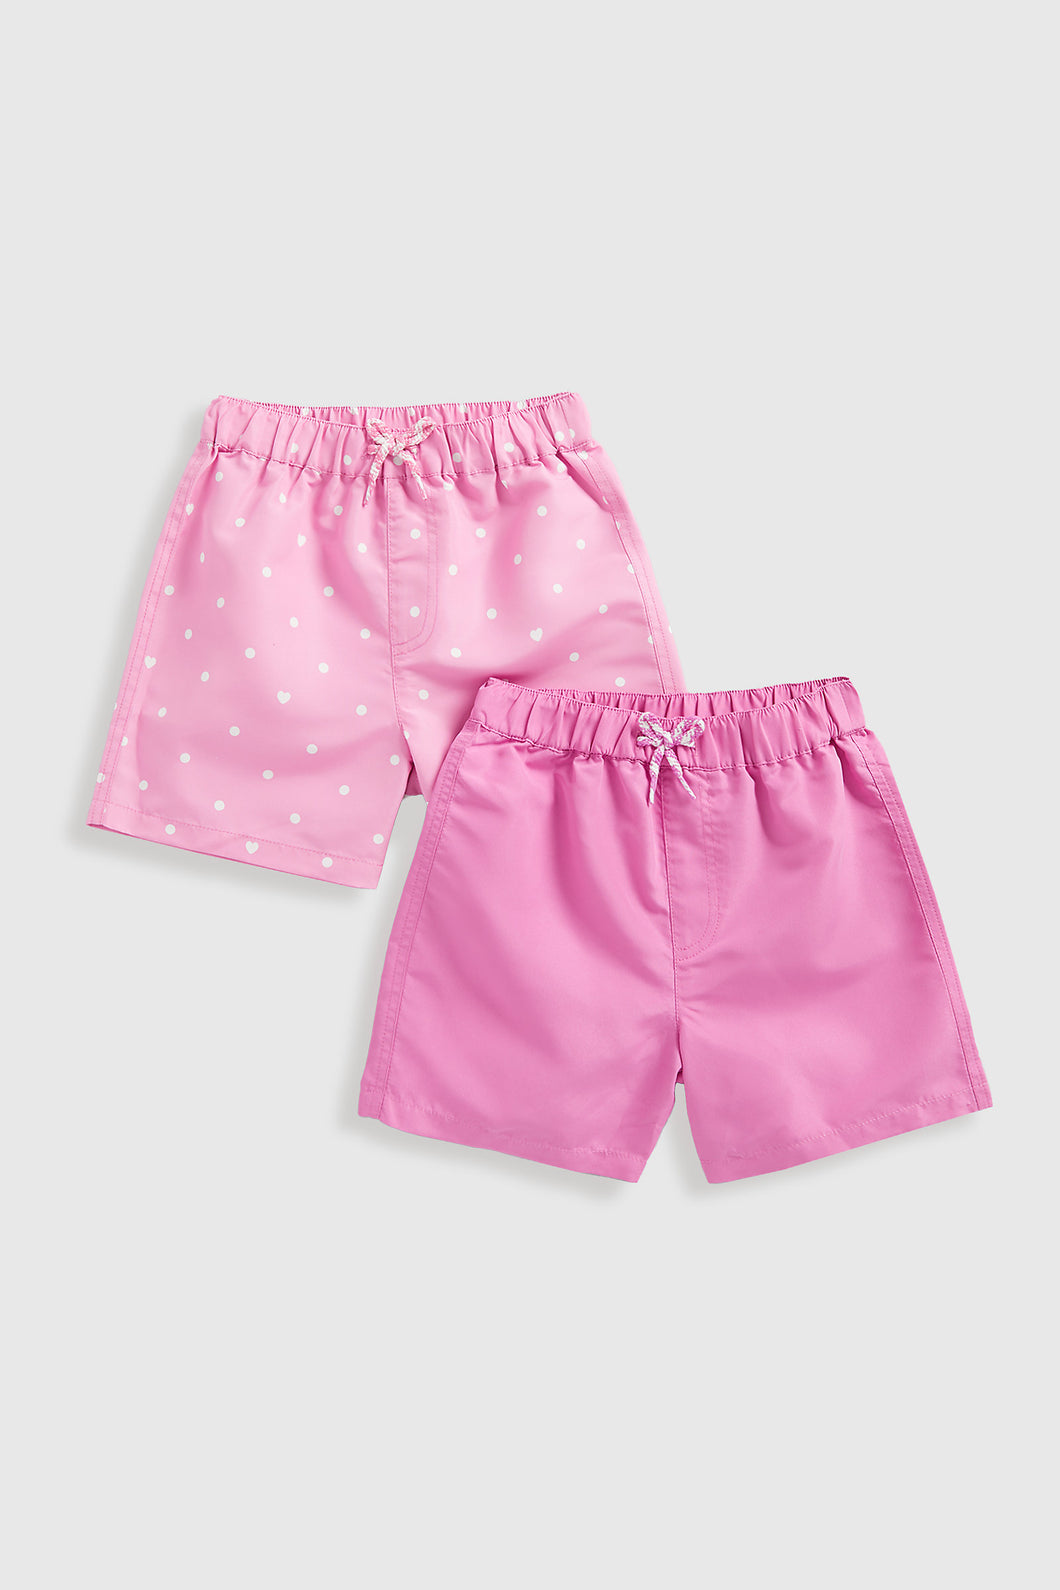 Mothercare Pink Board Swim Shorts - 2 Pack